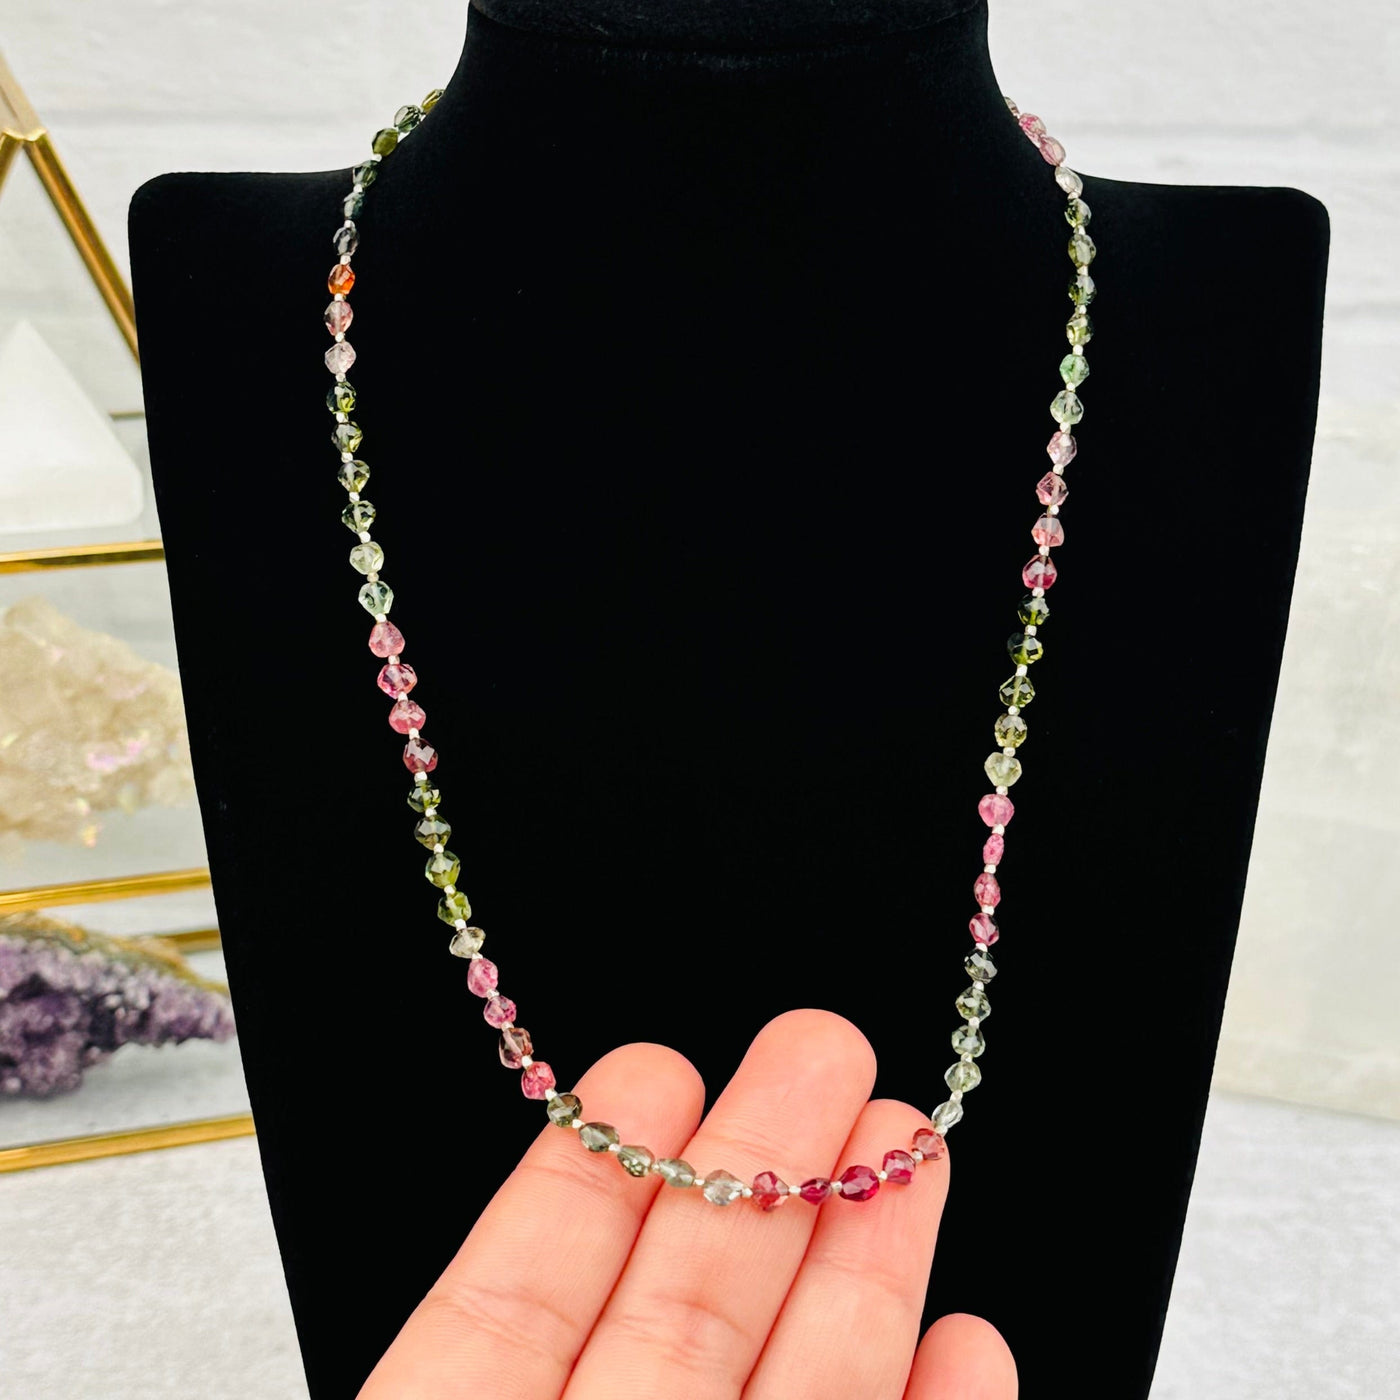 Faceted Watermelon Tourmaline Gemstone Necklace in hand for size reference 